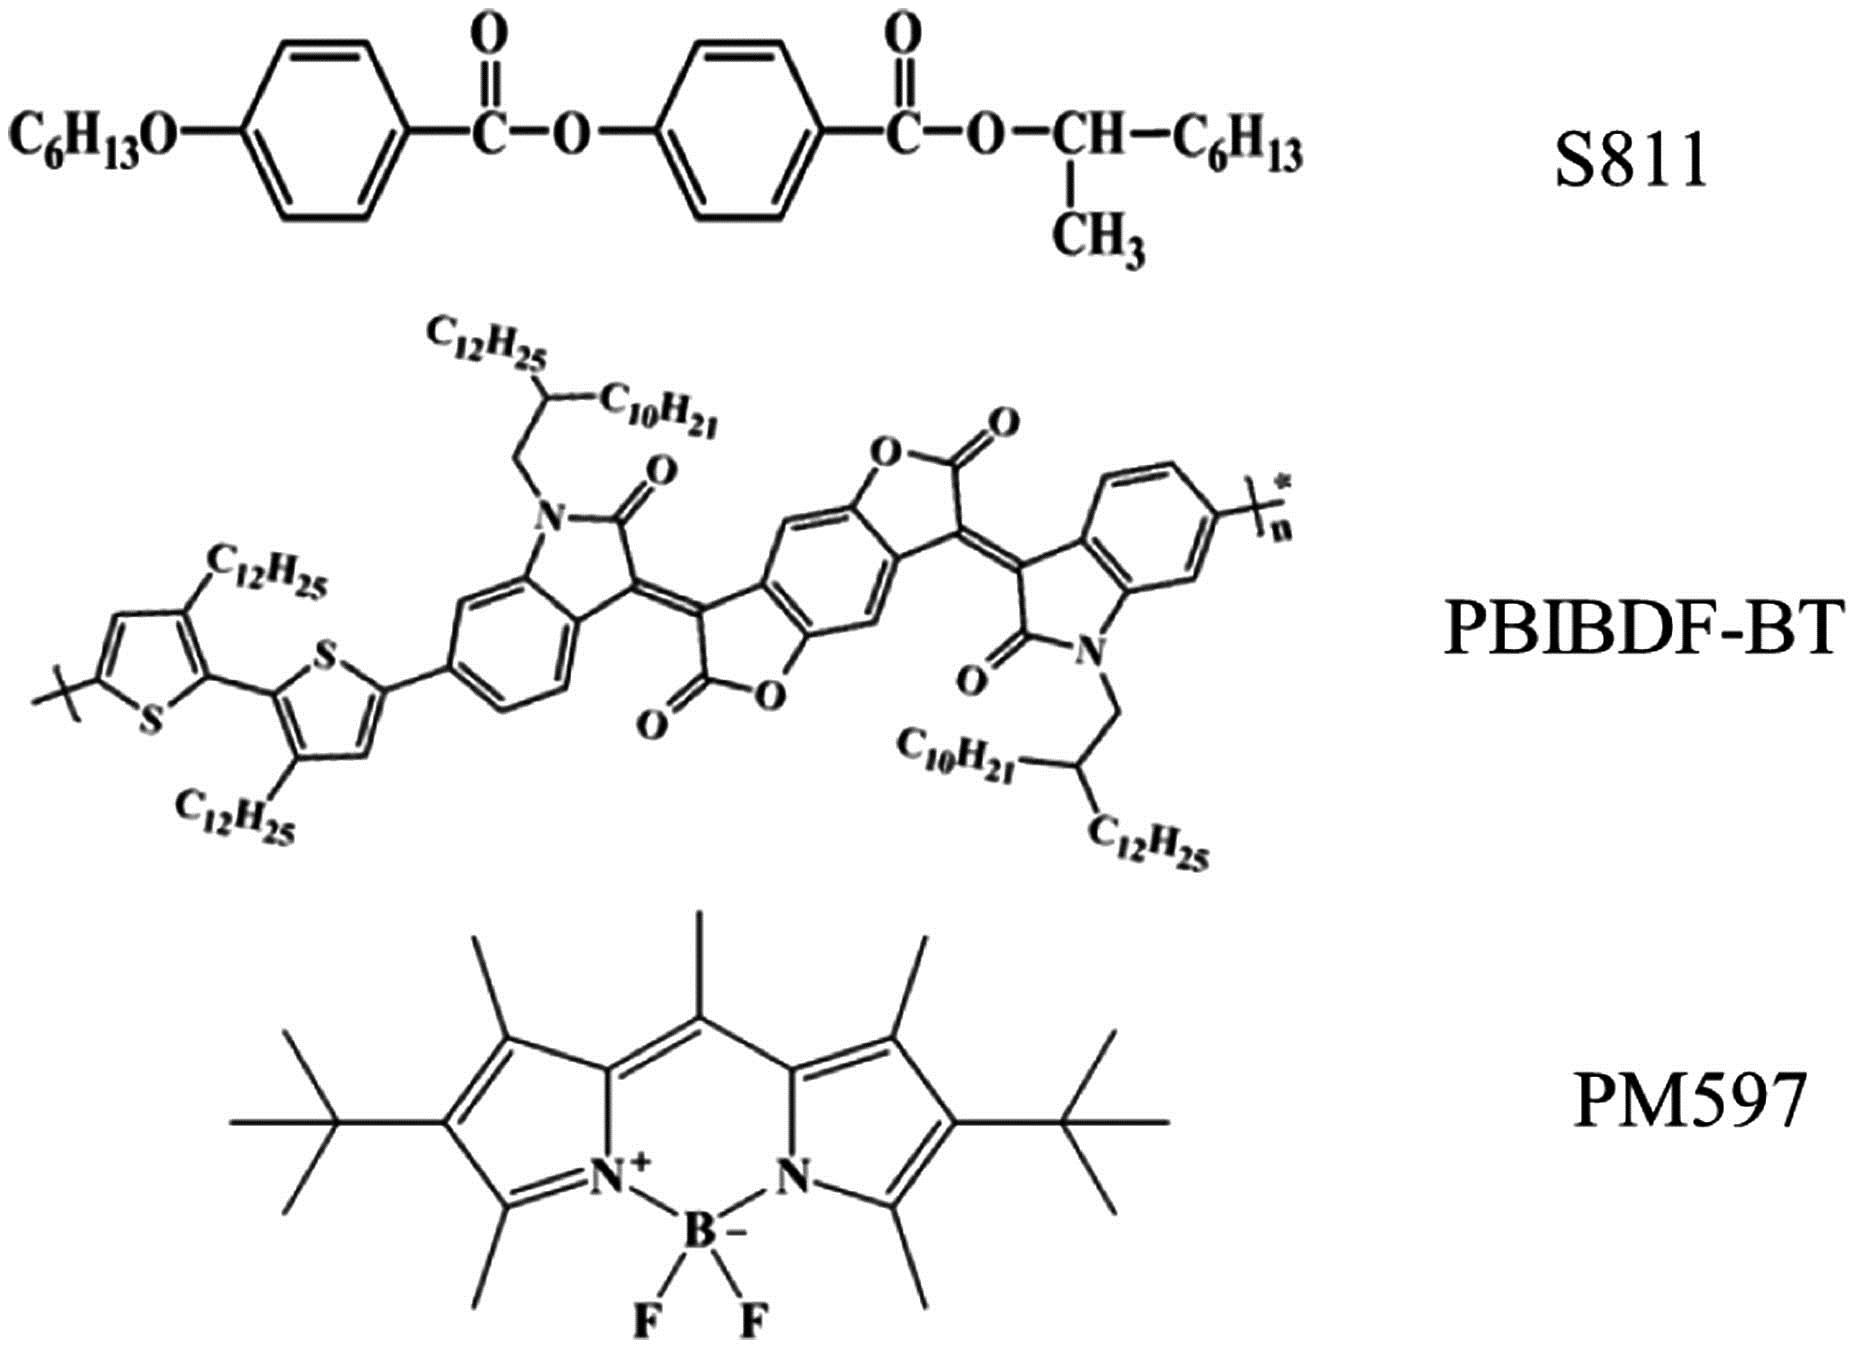 Chemical structures of chiral agent S811, infrared absorbing material PBIBDF-BT, and laser dye PM597.